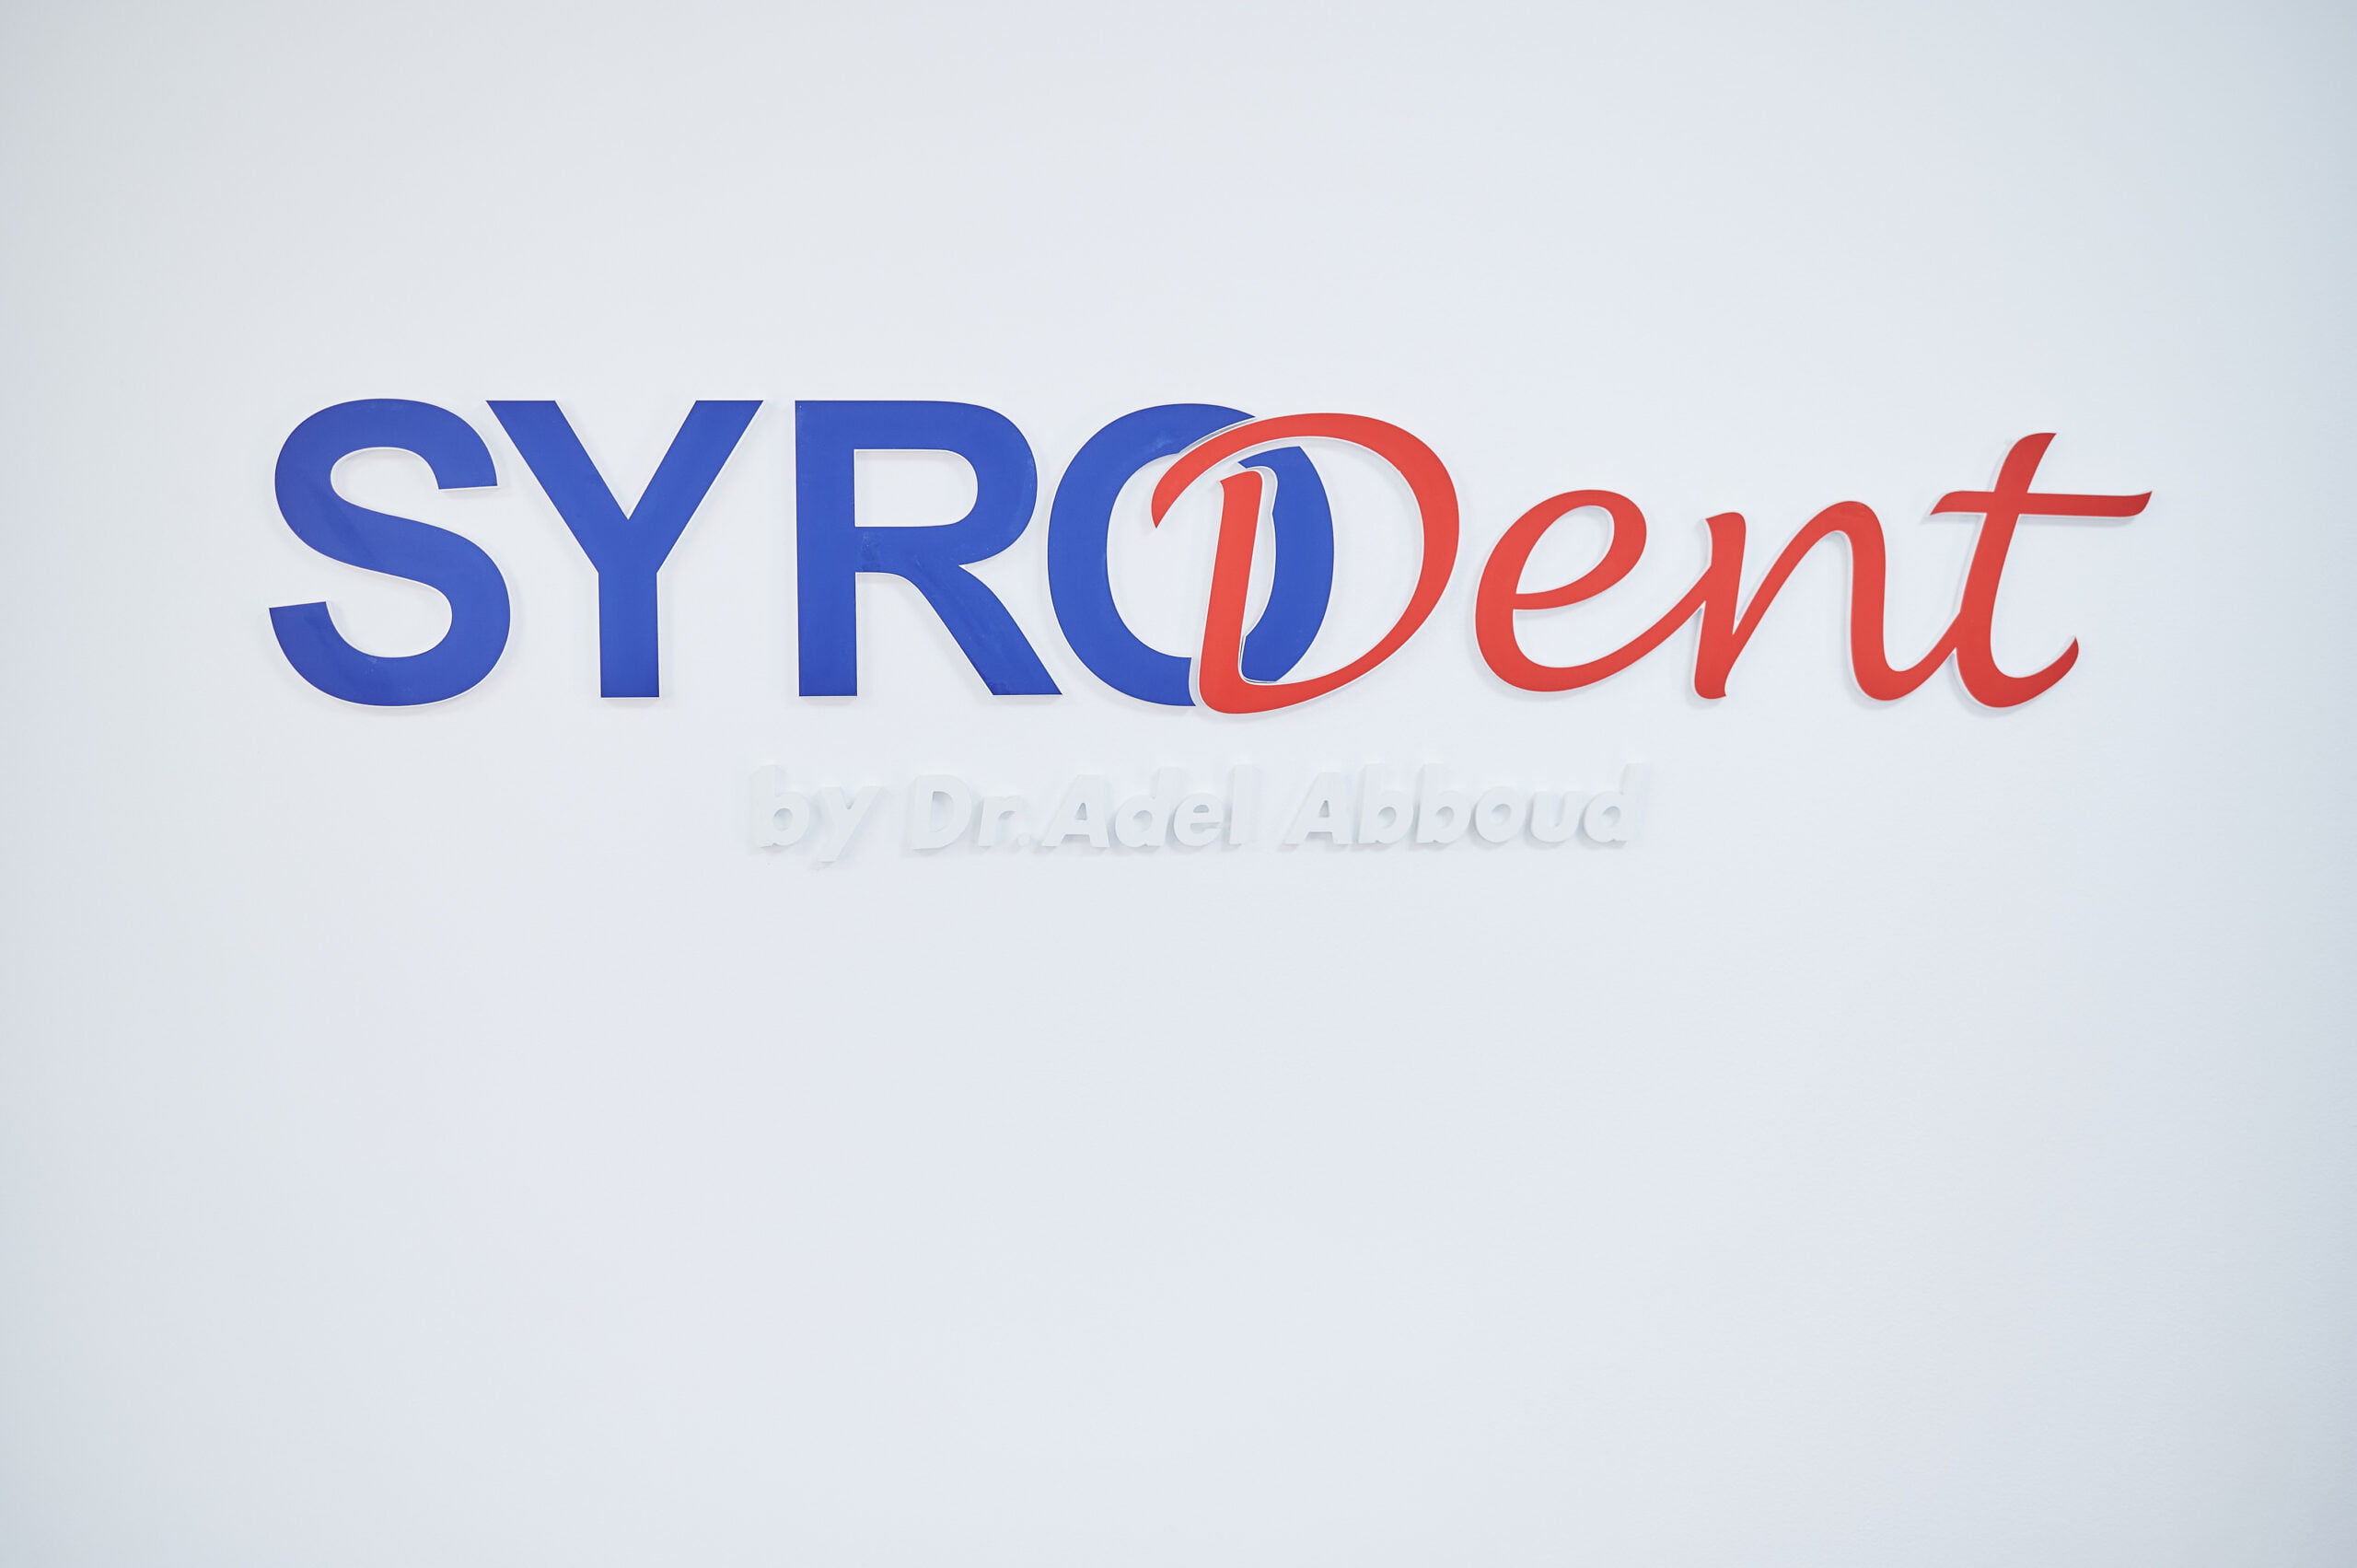 Logo perete - SyorDent by Dr. Adel Abboud